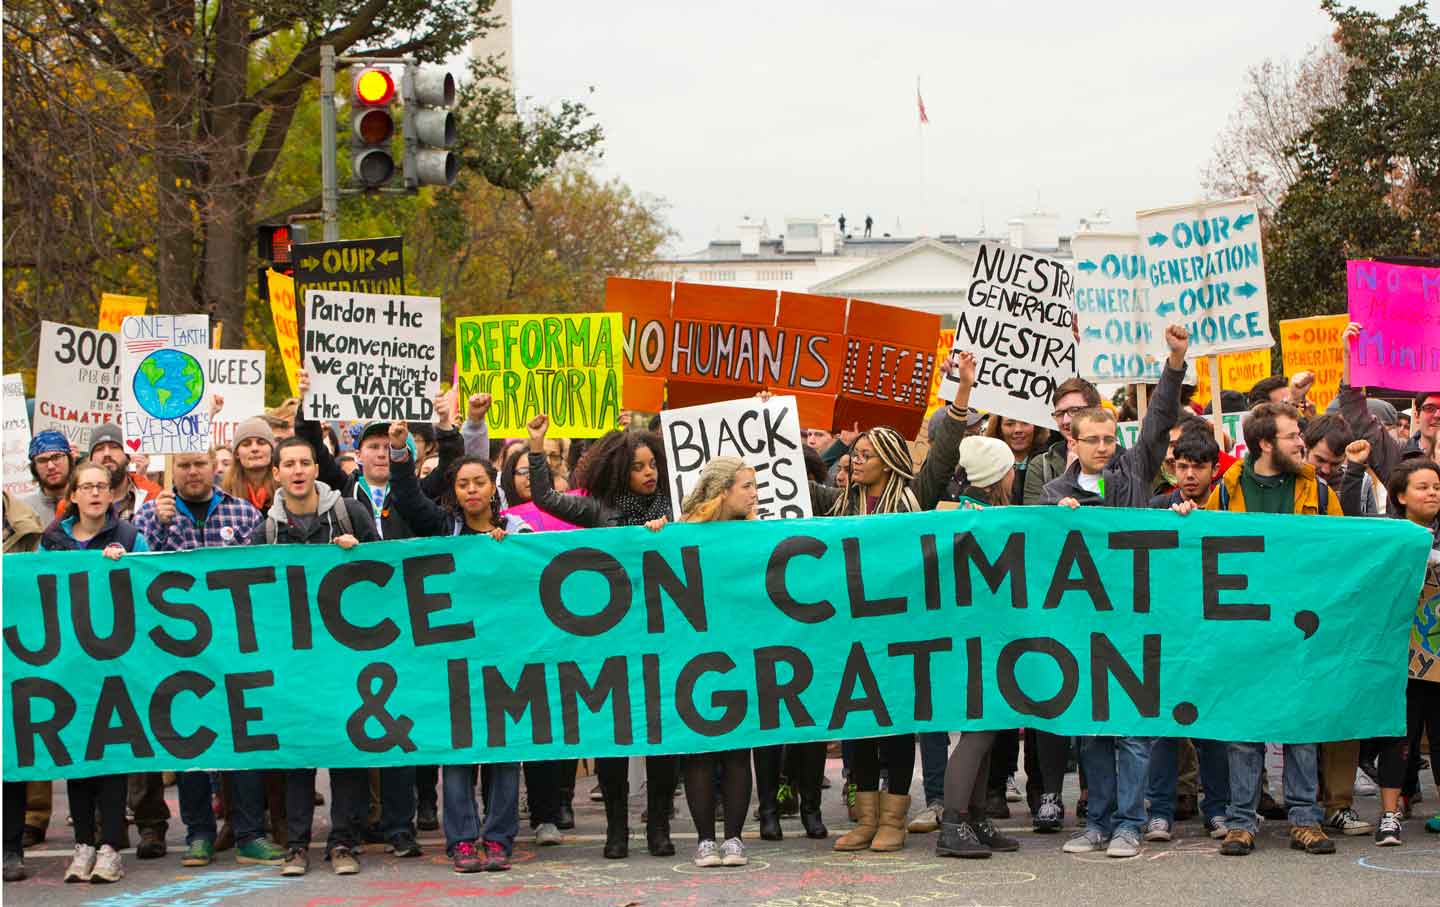 Group Rallying for Justice on Race, Climate and Immigration Issues